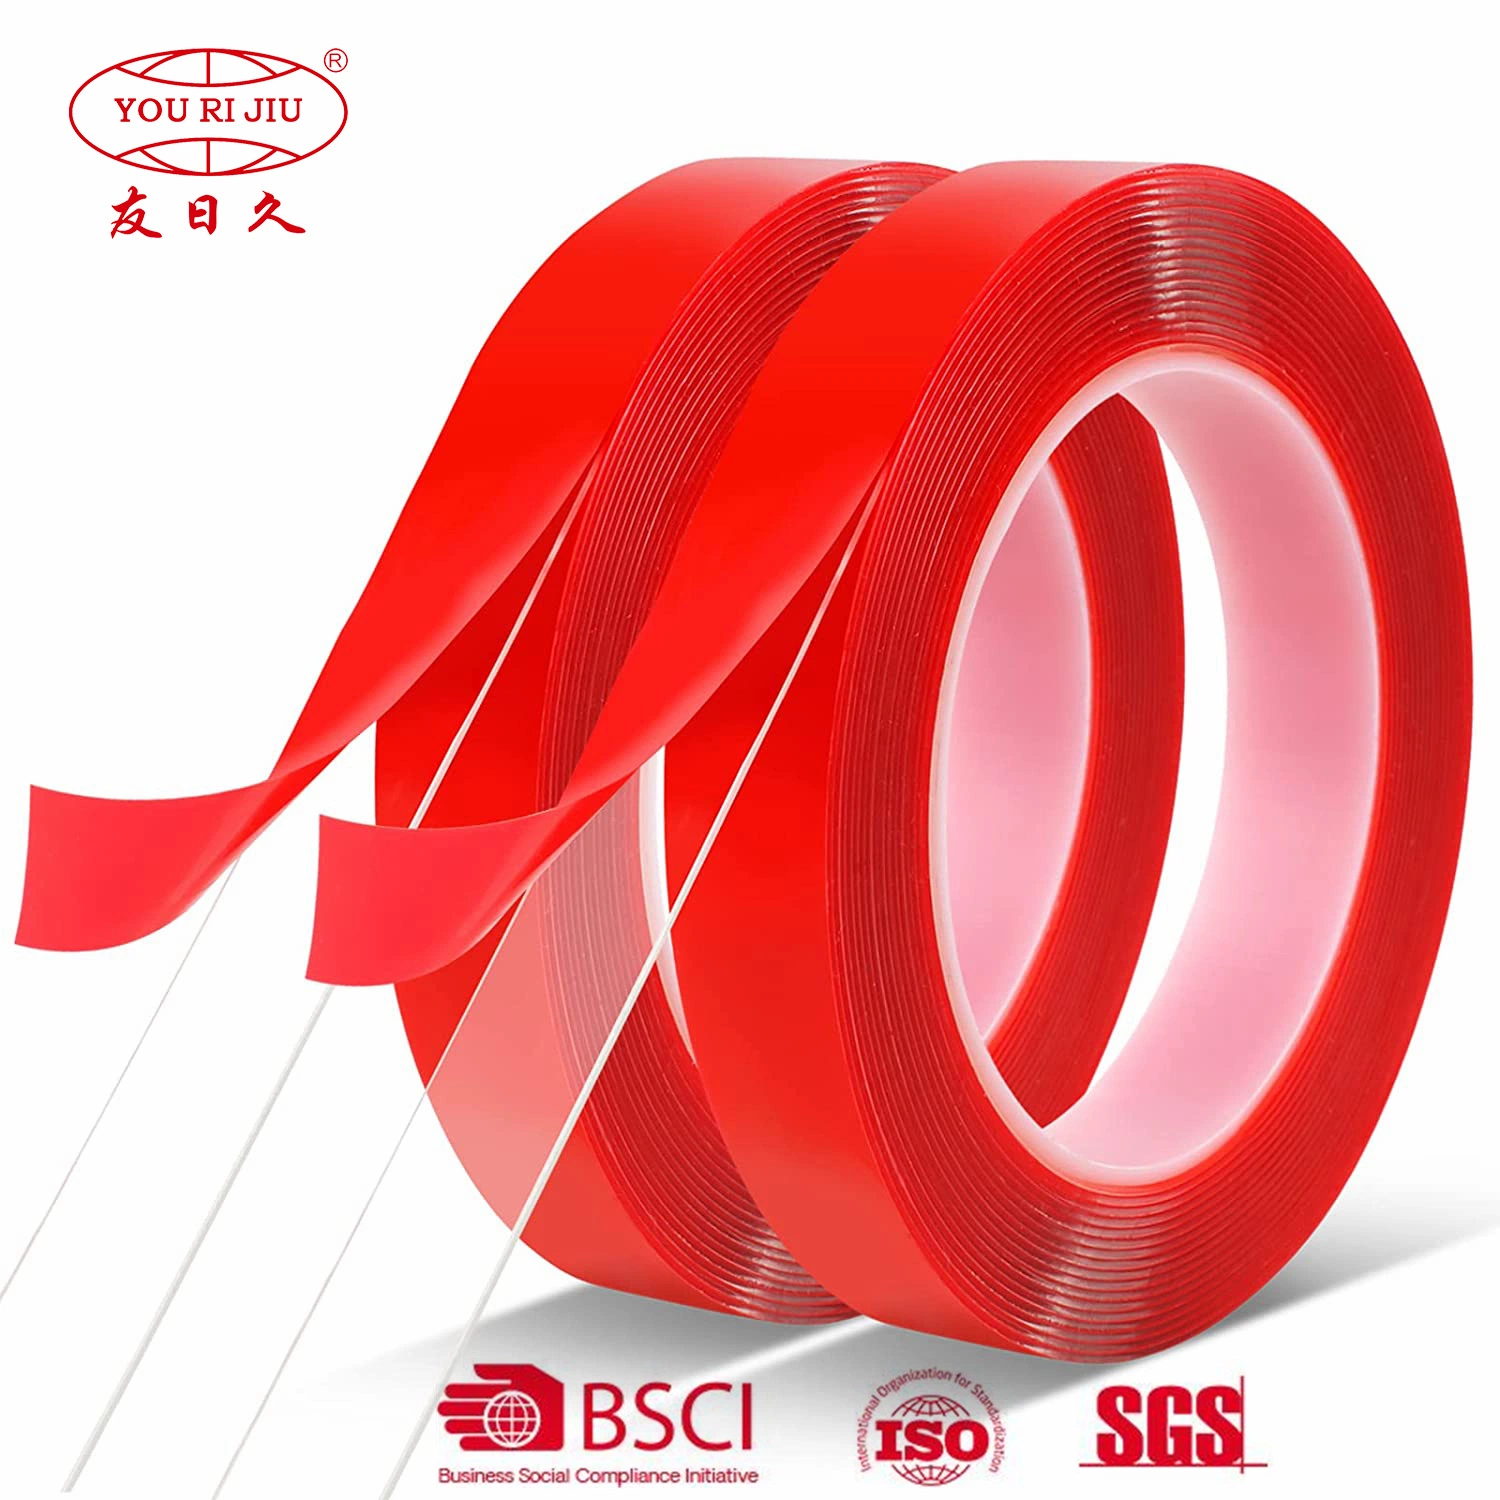 30% off Yourijiu Removable Waterproof Transparent High Bonding Adhesive White Paper Pet Clear PE Red Film Double Sided Acrylic Tape